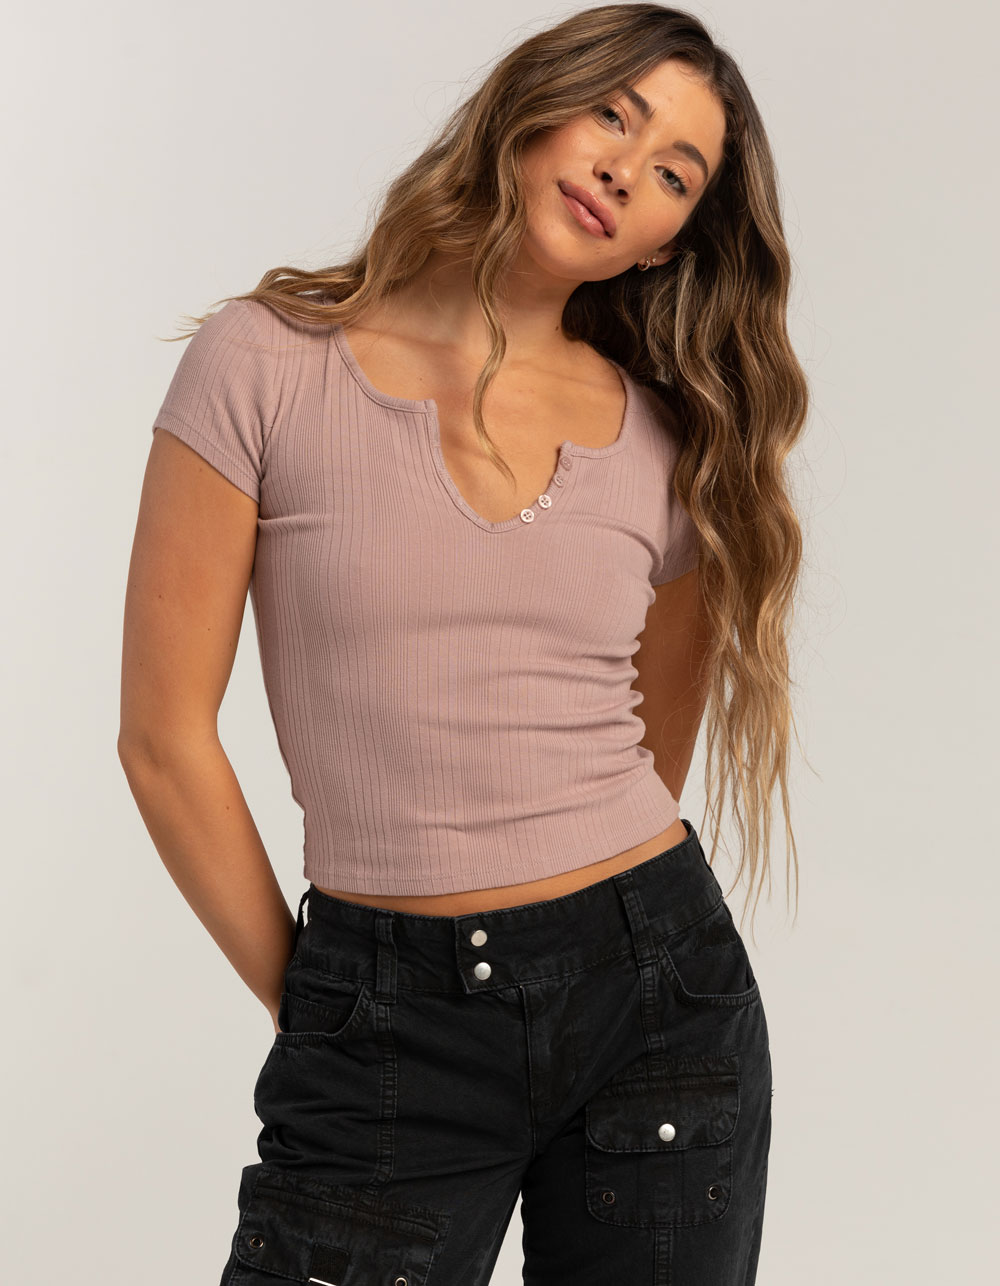 BDG Urban Outfitters Button Notch Neck Womens Top - PINK